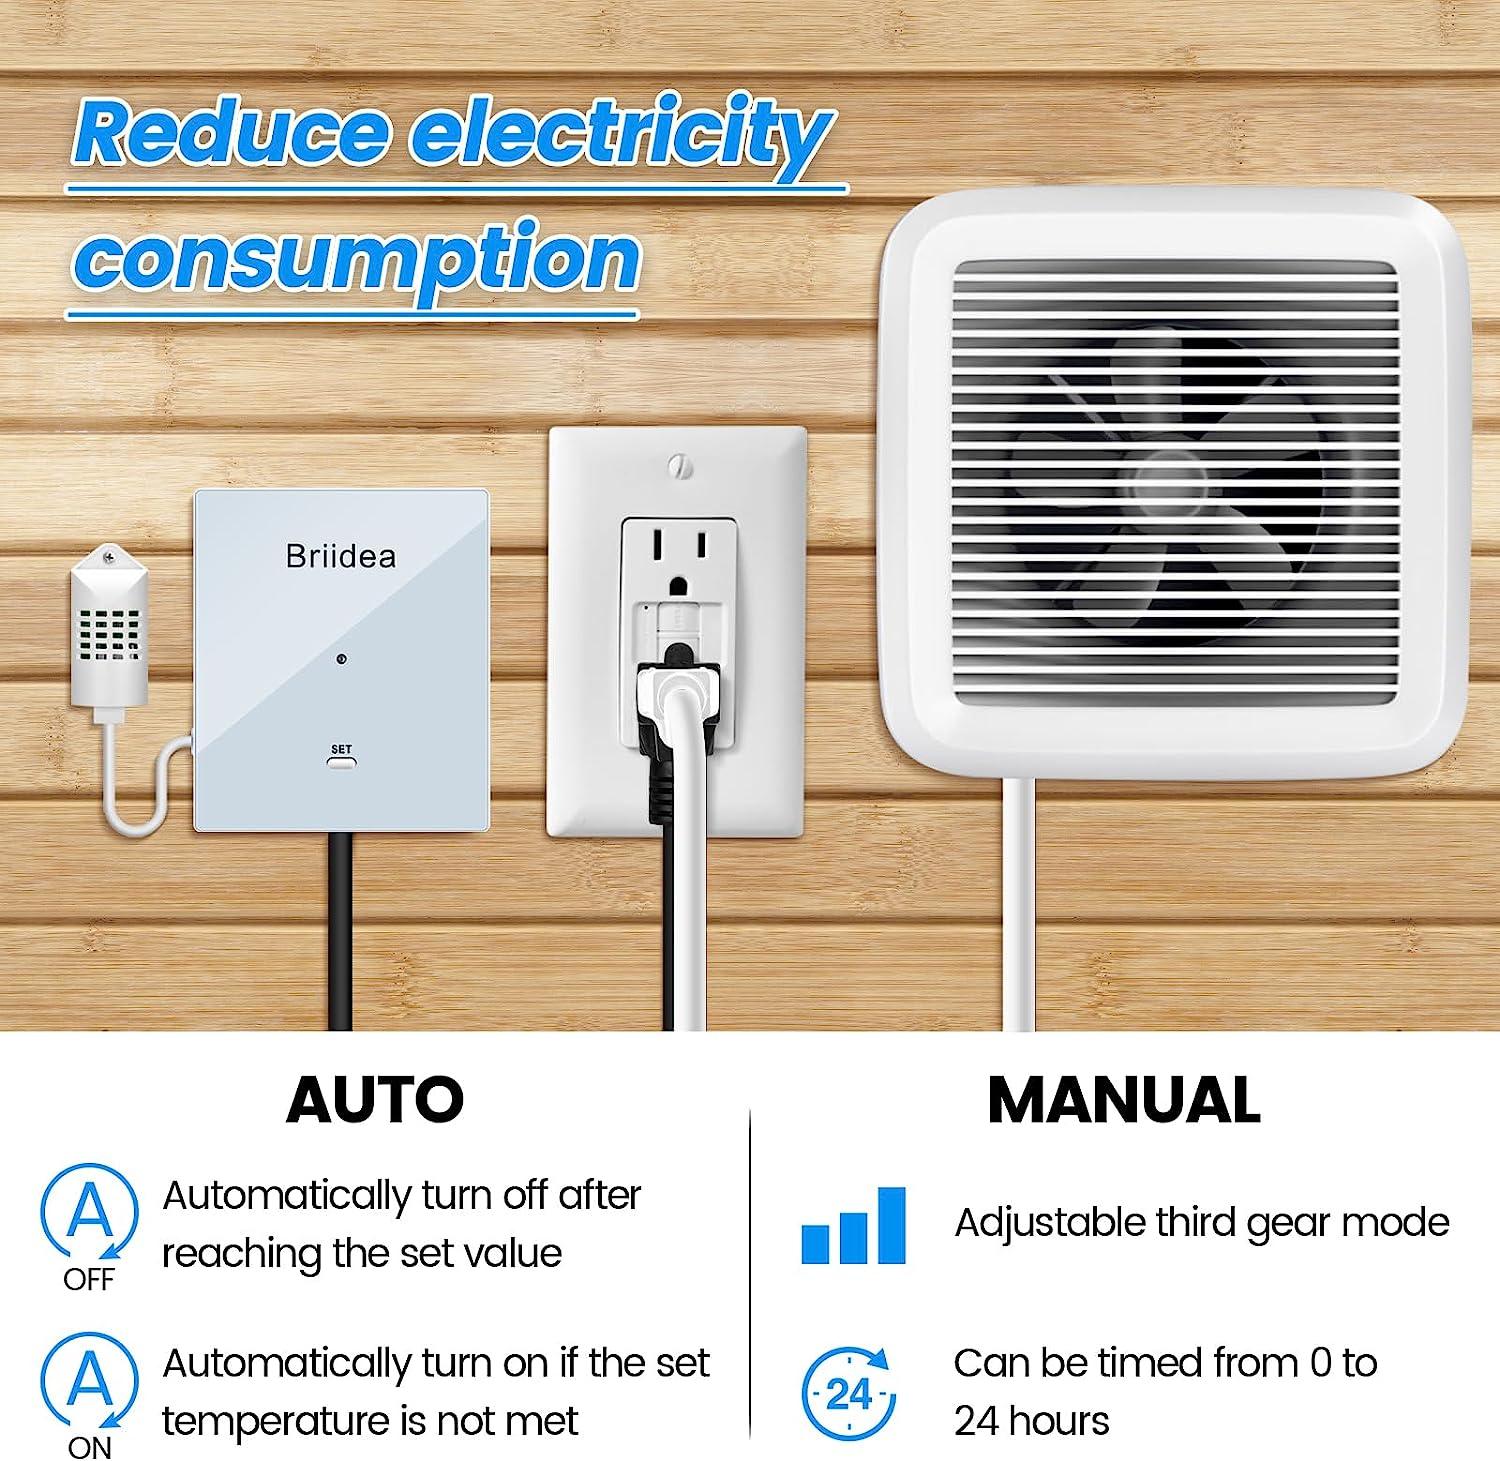 briidea Exhaust Fan Remote Control Kit, Attic Fan Thermostat Control Kit with Temperature & Humidity Sensor for Achieving a Cool and Dry Attic, Easily Convert Your Hardwired Fans to Smart Fans - briidea